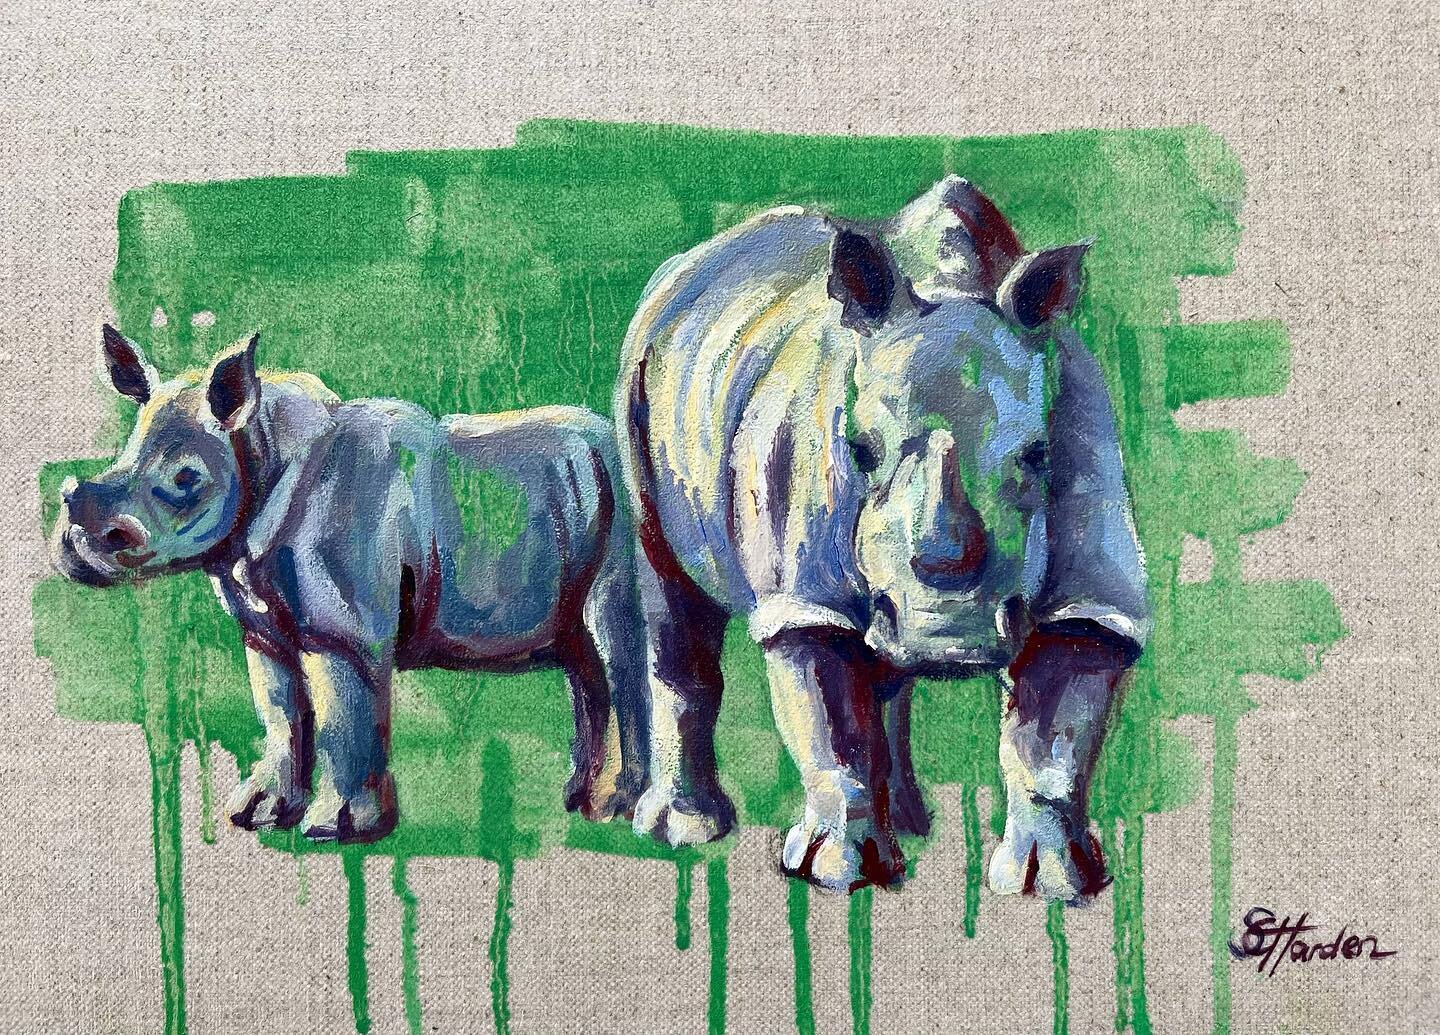 To celebrate#worldrhinoday I am selling these two beauties for &pound;225 + P&amp;P 30x20cm. PM to buy #rhinos #worldrhinoday #africa #animalsofinstagram #safari #forsale